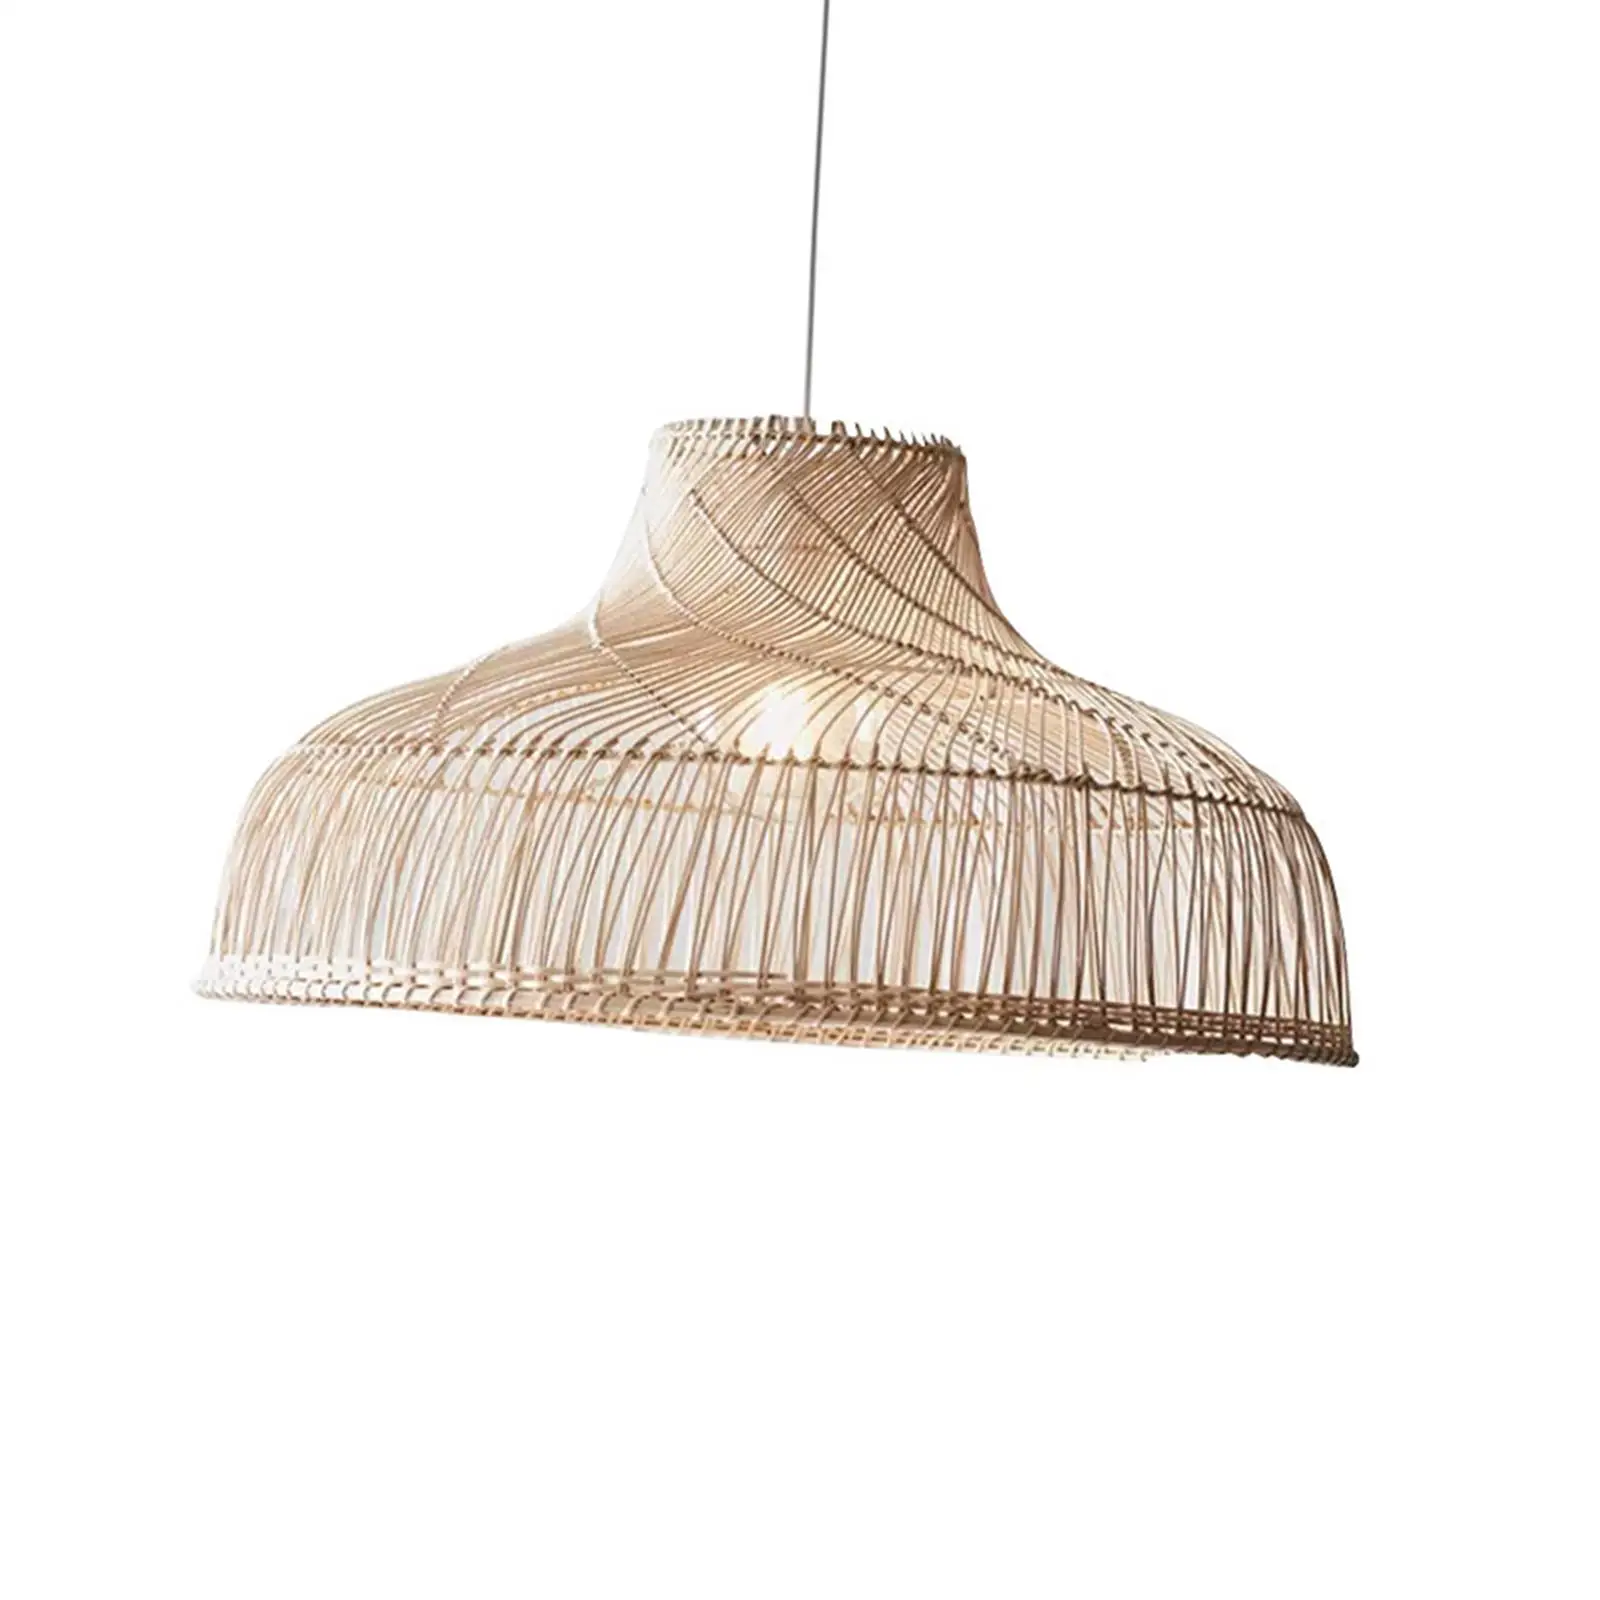 Rattan Woven Lampshade Pendant Lamp Shade for Office Kitchen Decor